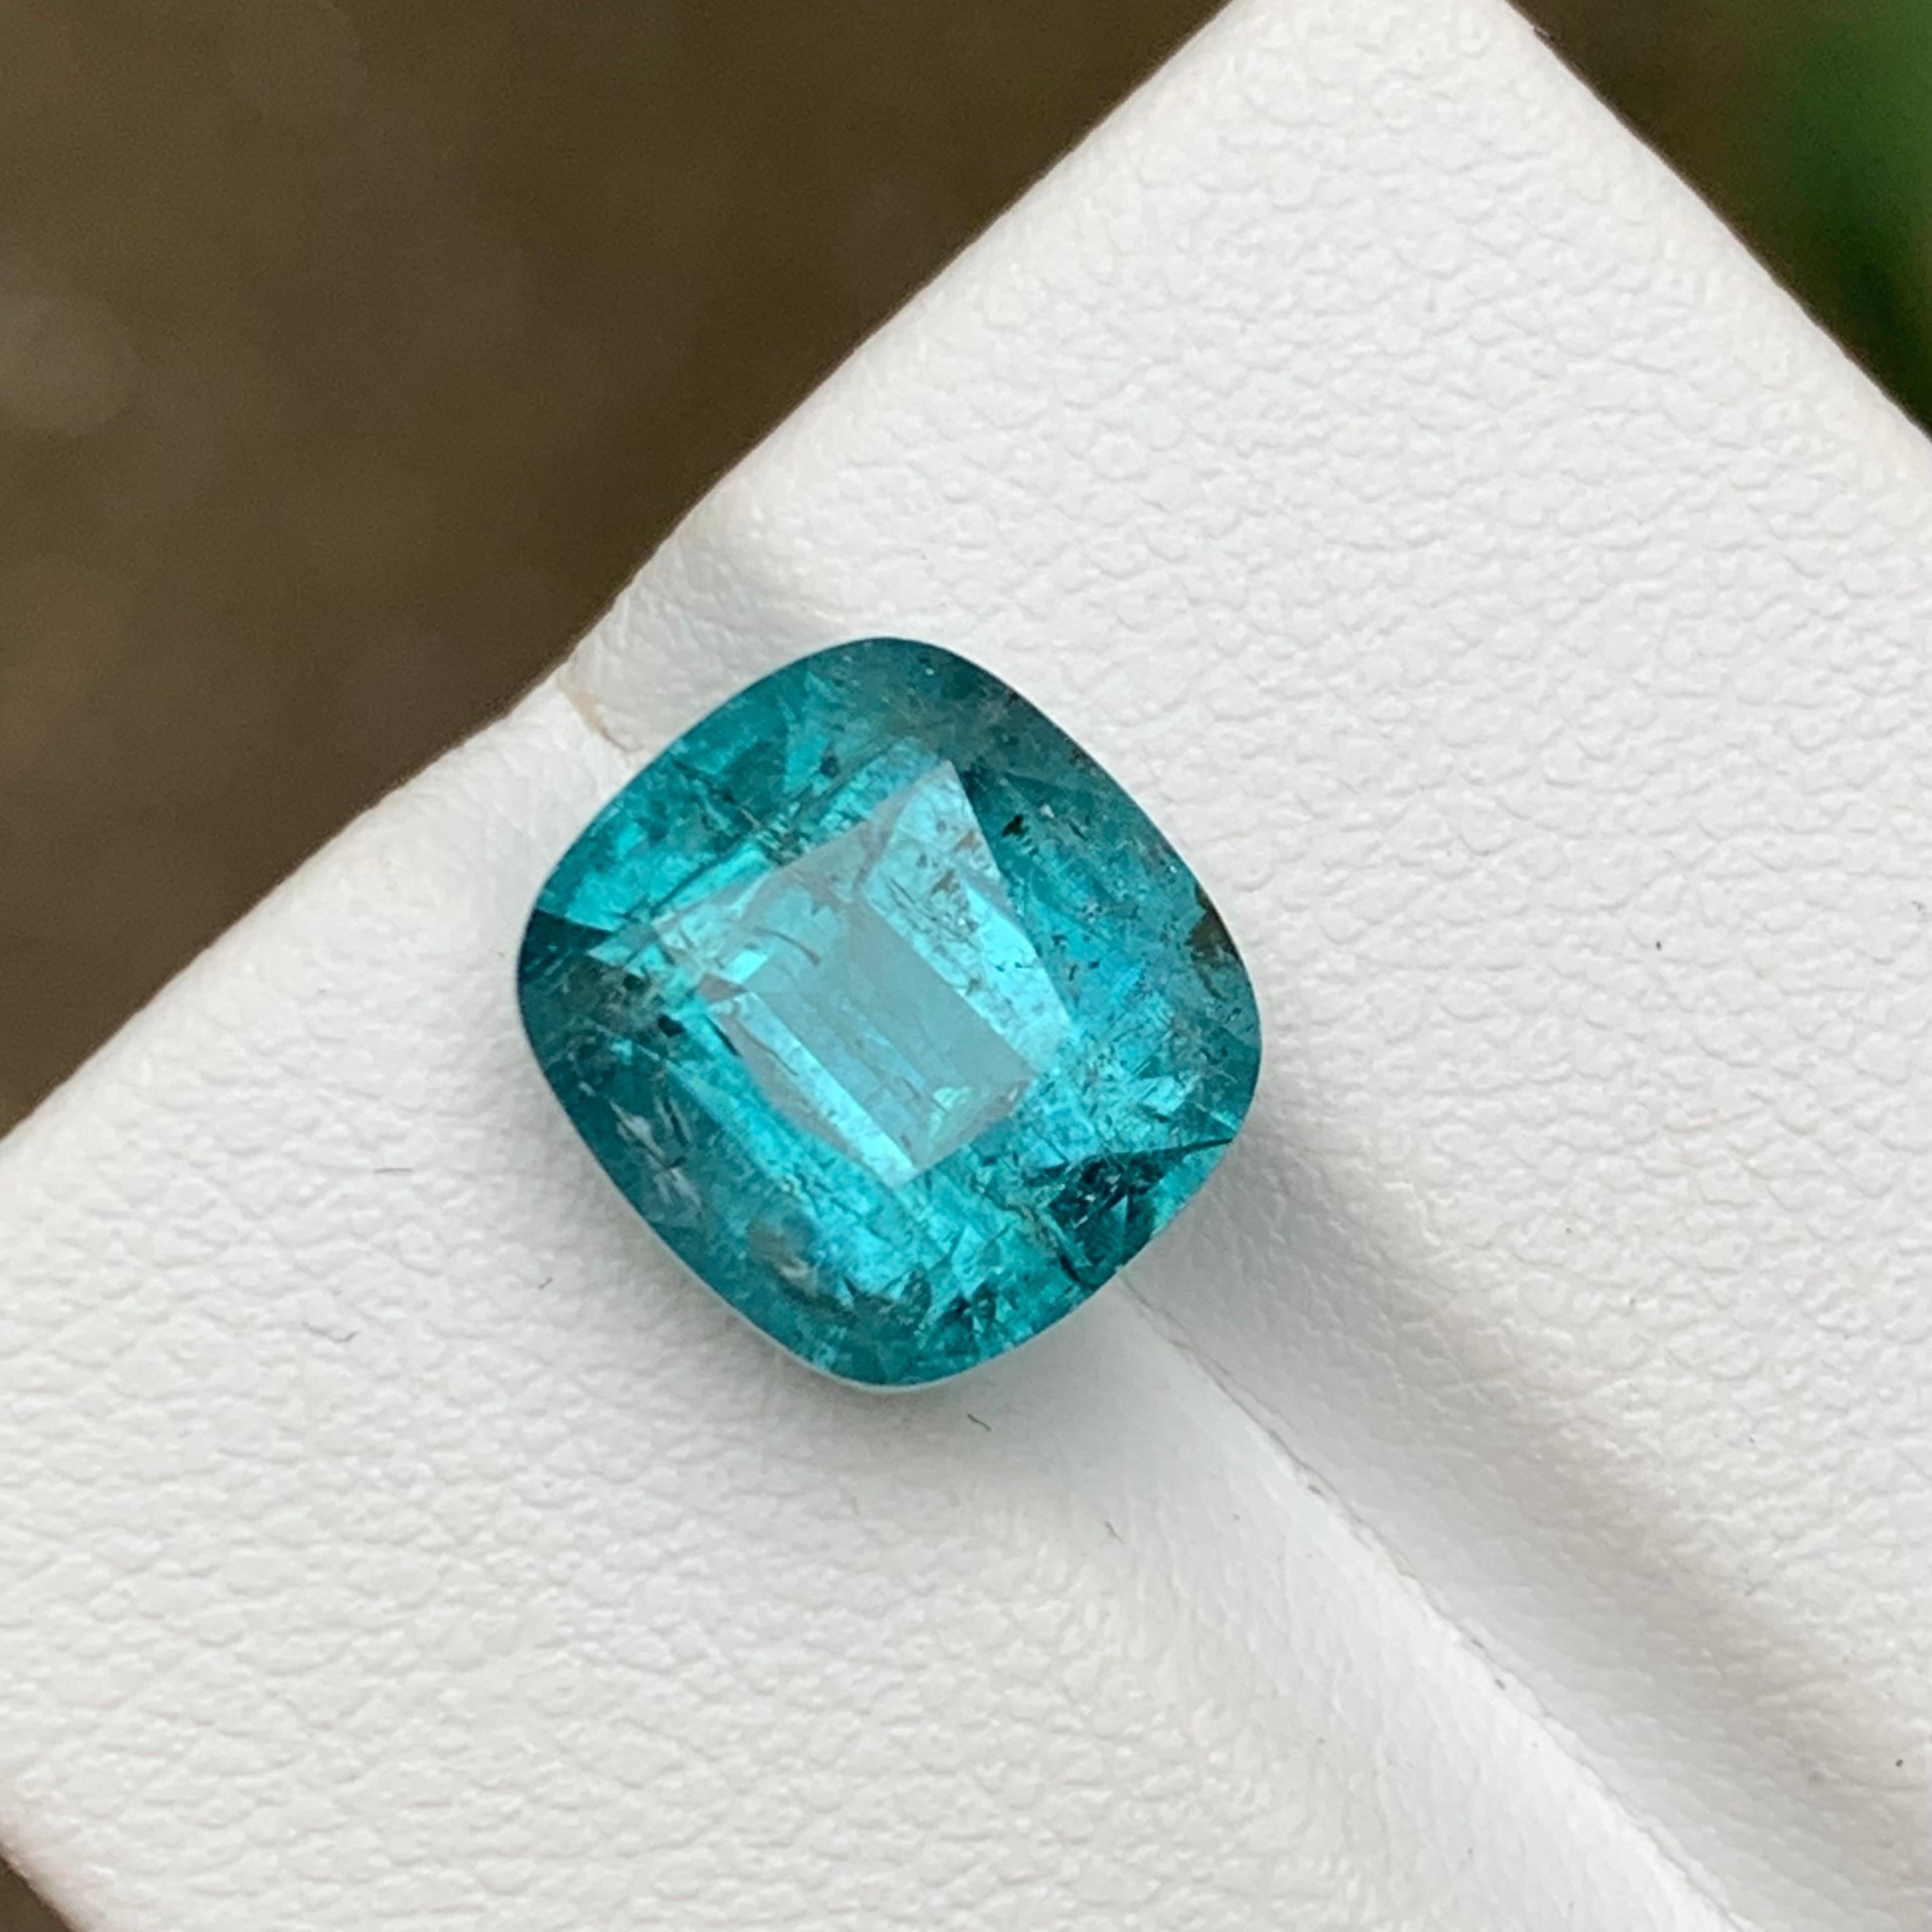 Rare Blue Natural Tourmaline Gemstone, 6.25 Ct Cushion Cut for Ring/Jewelry  For Sale 10